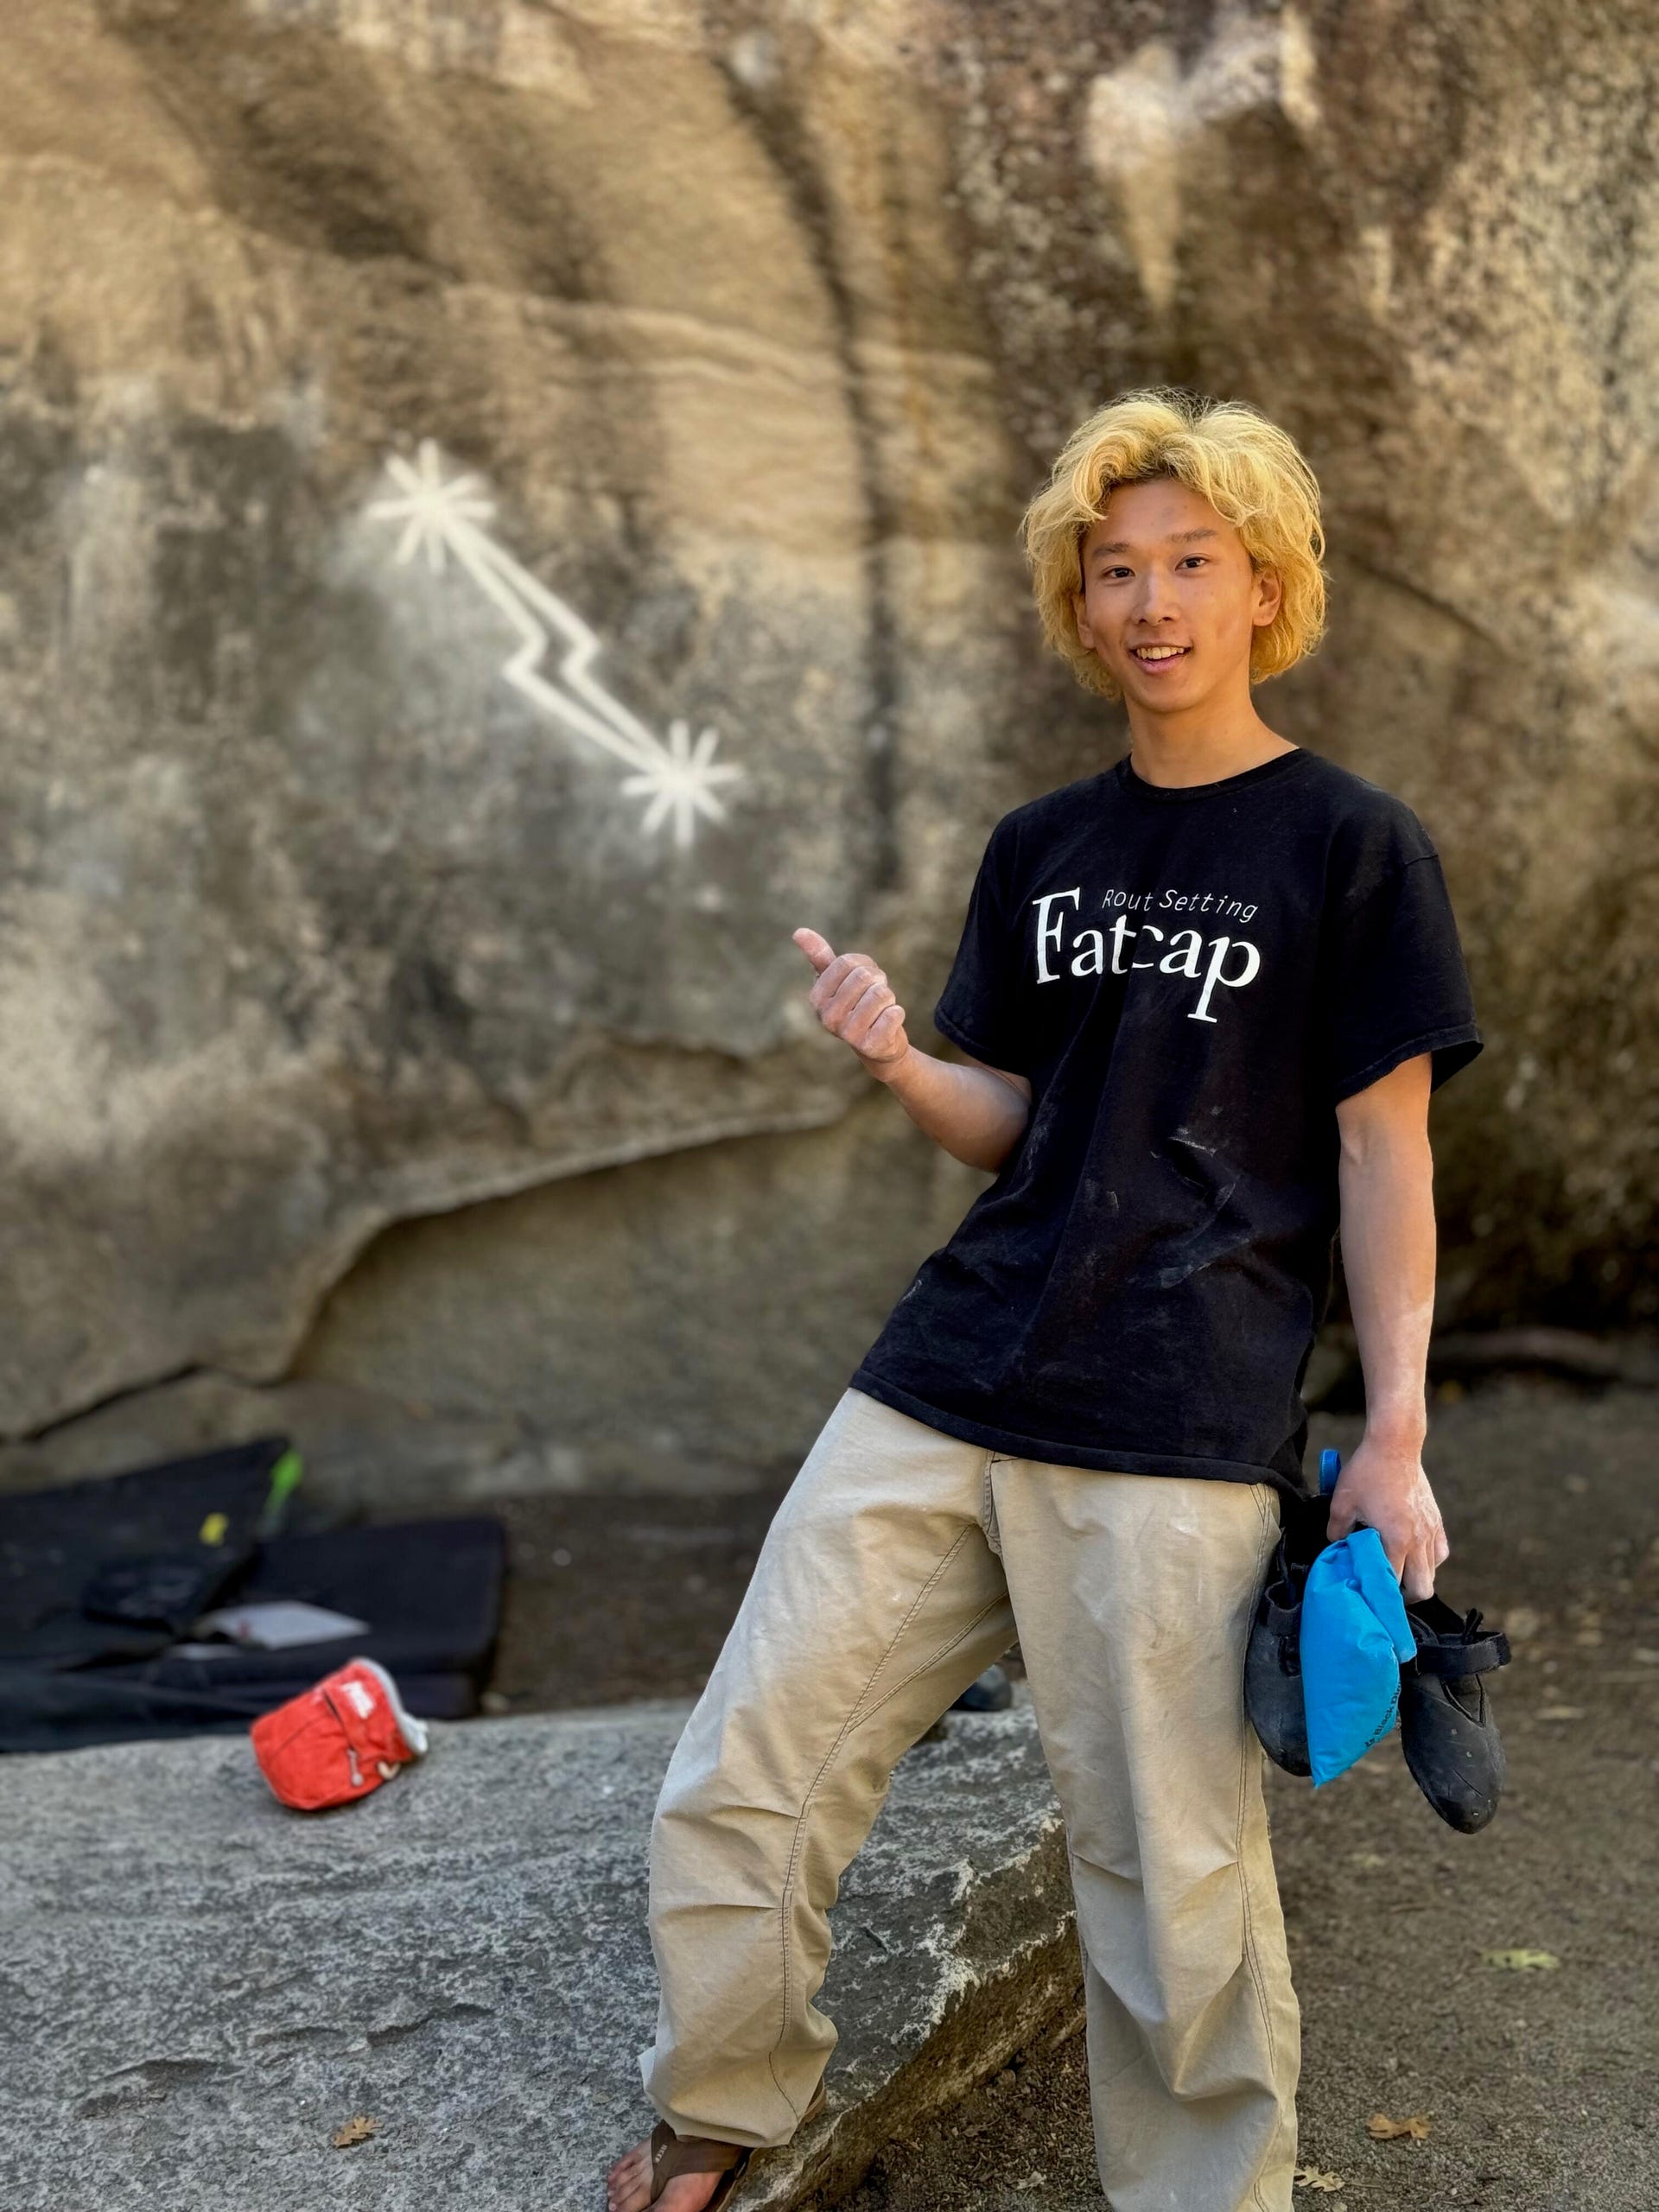 Hibiki managed to climb the incredibly difficult Midnight Lightning boulder, one of the world's most famous bouldering problems